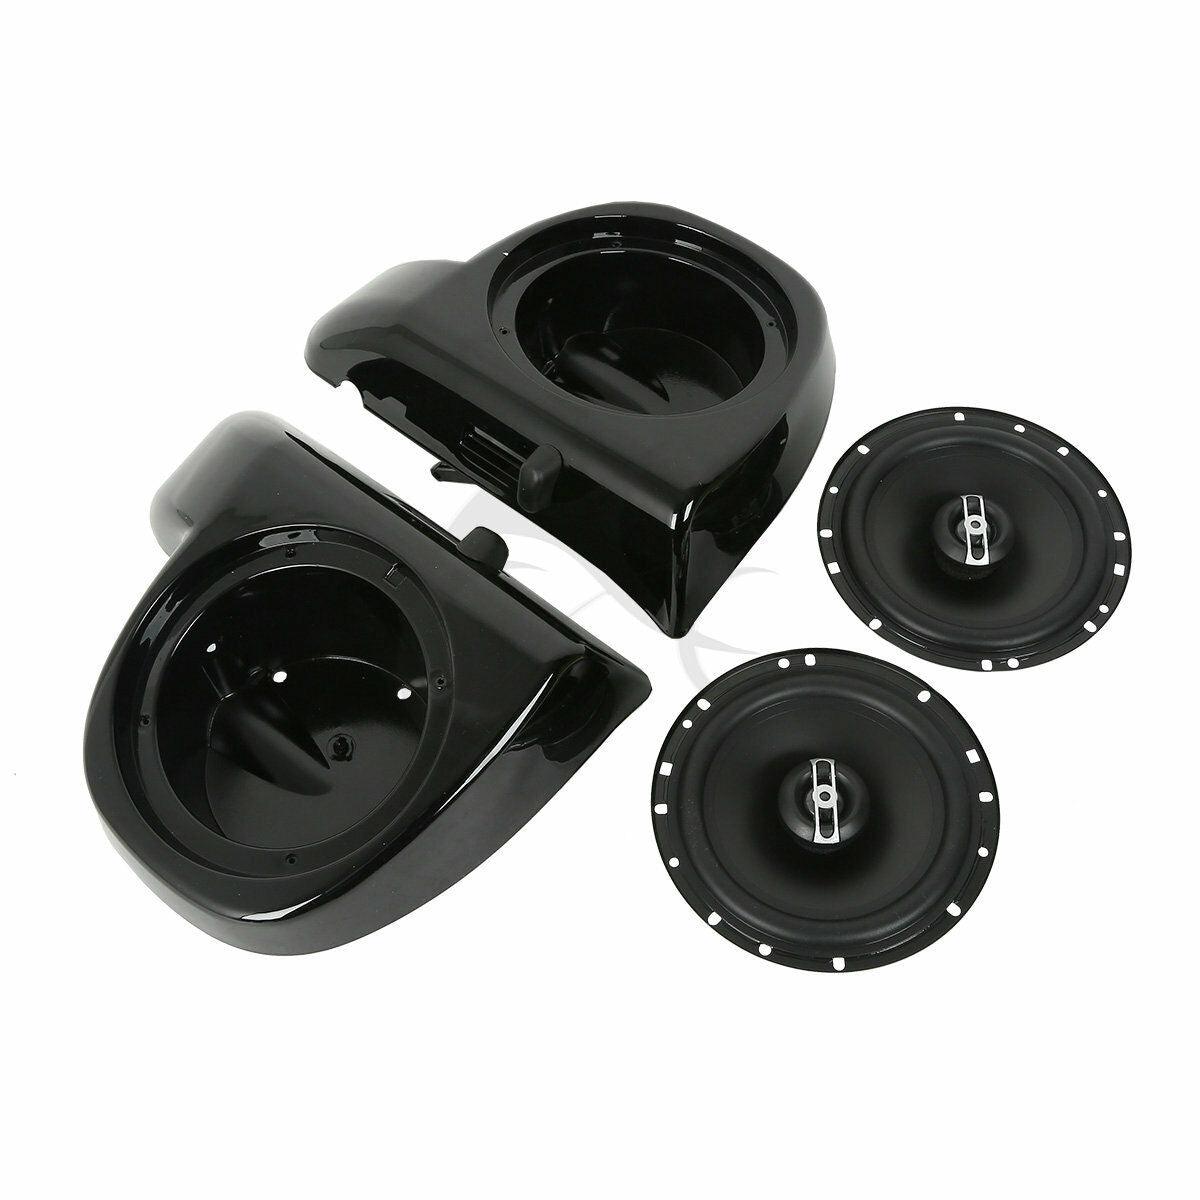 Black 6.5" Lower Vented Fairing Speaker Glove Box Fit For Harley Touring 14-21 - Moto Life Products